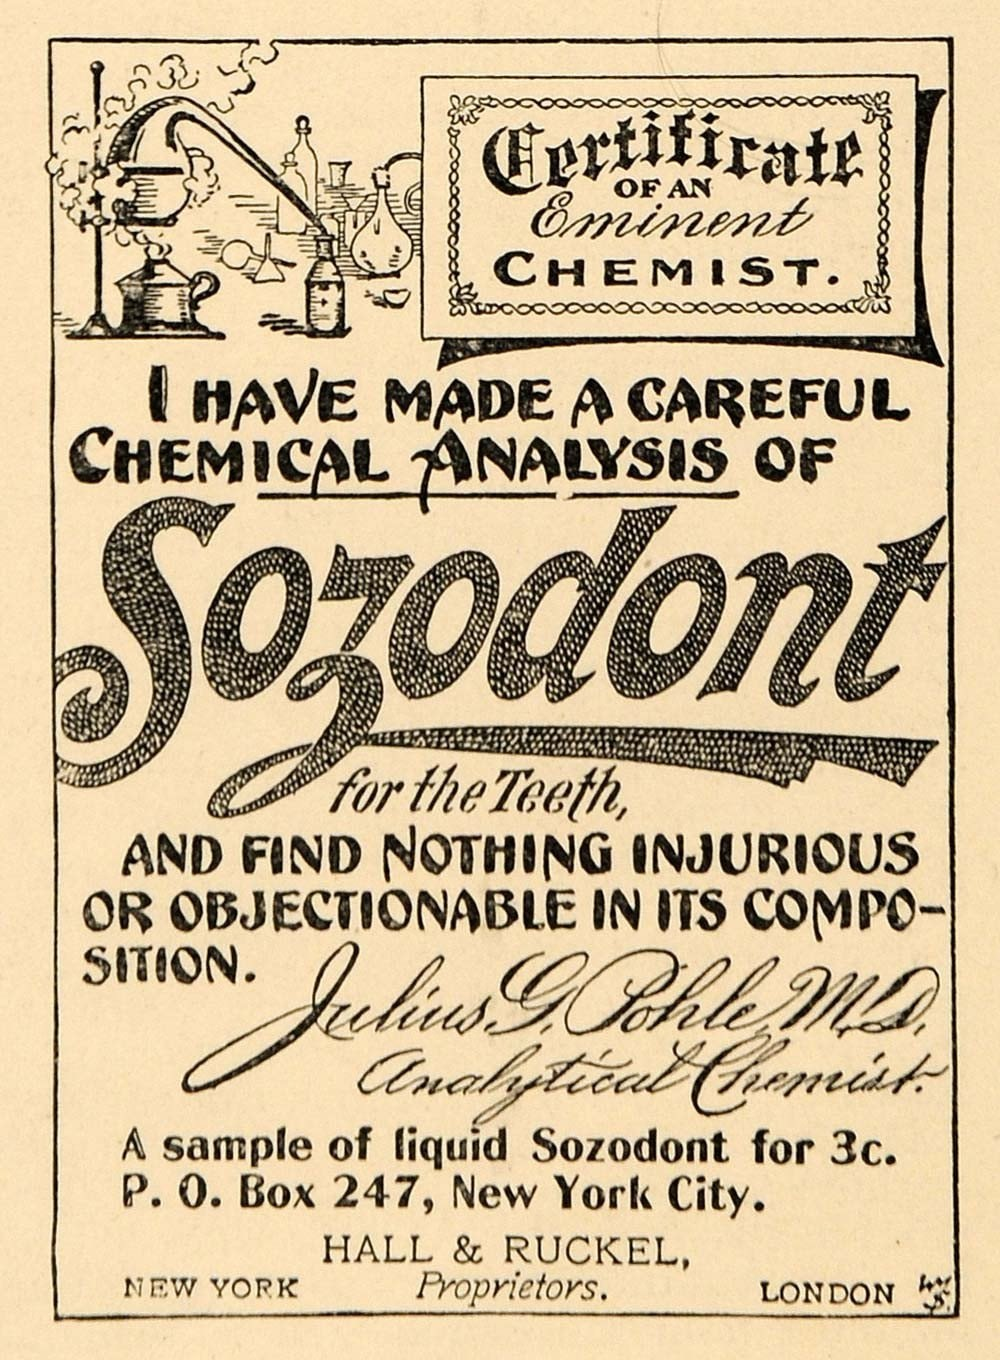 A vintage ad for Sozodont.